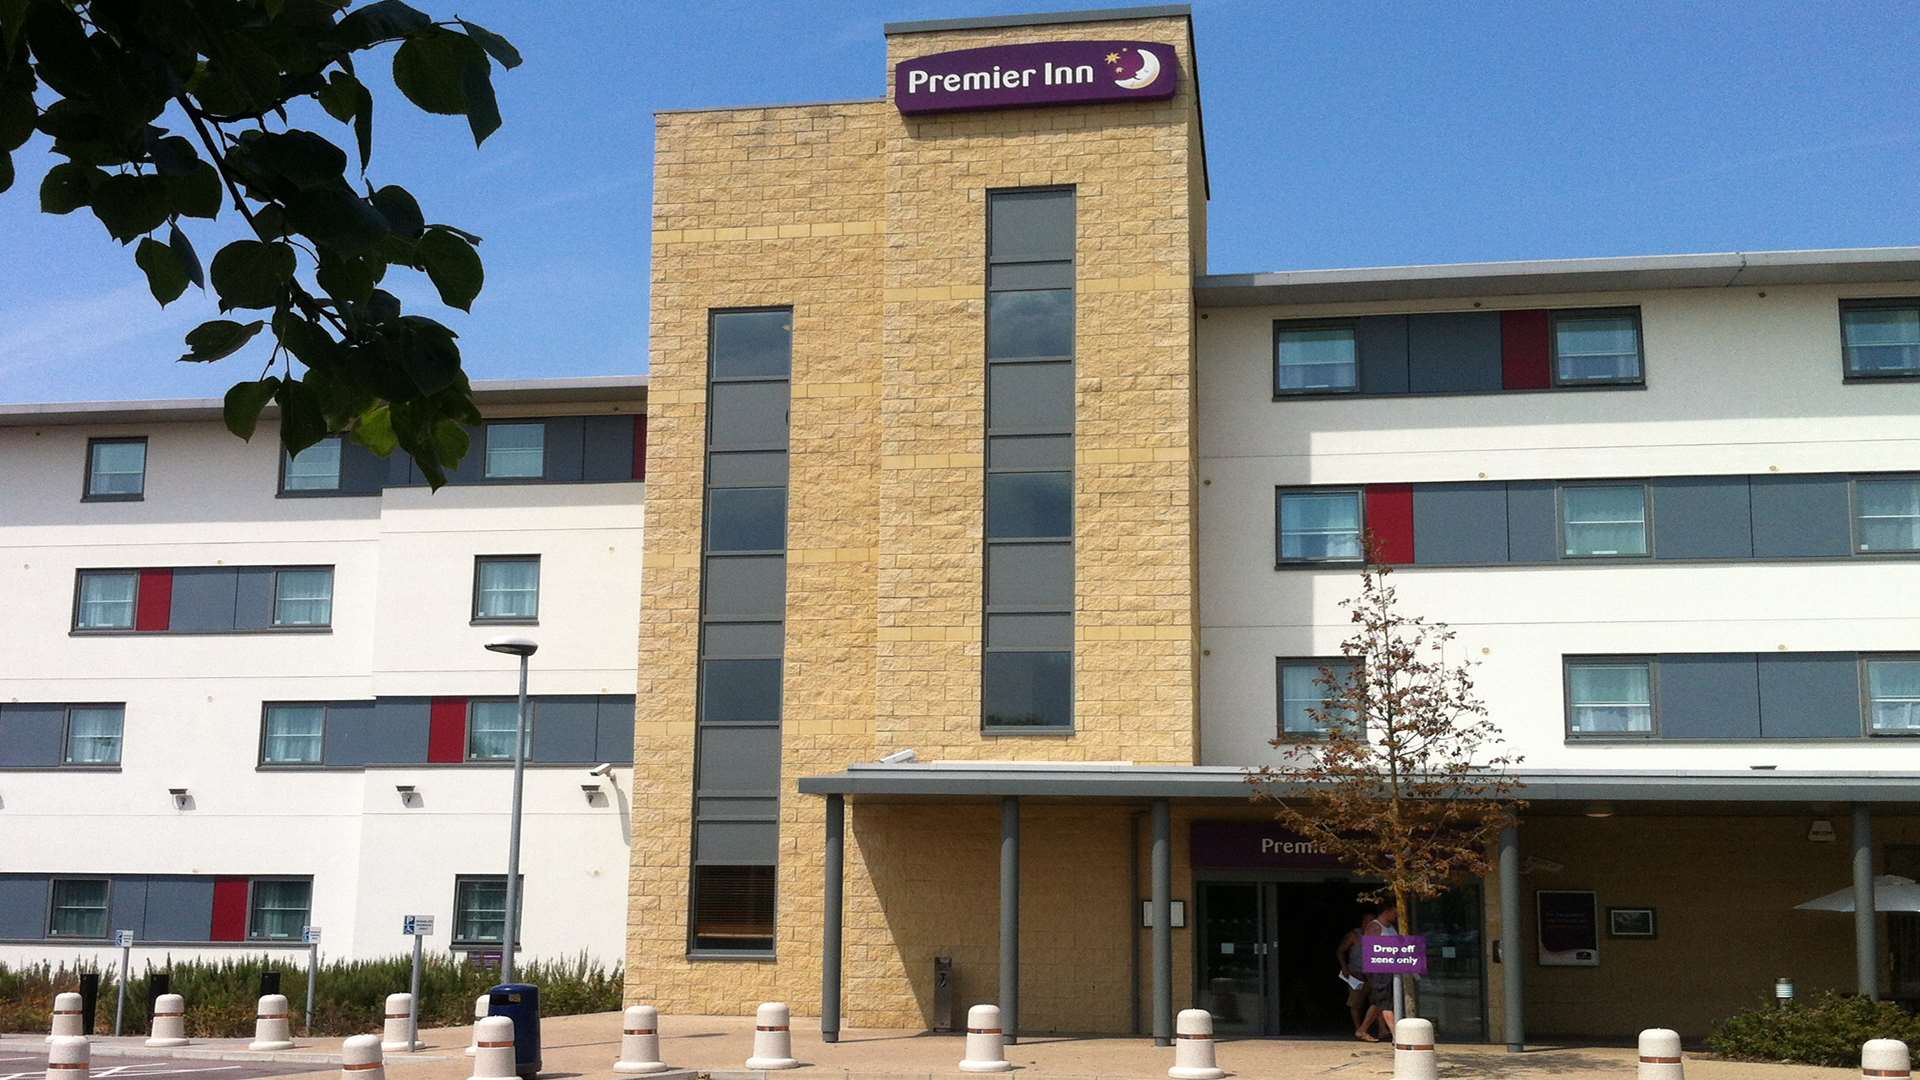 Premier Inn at Medway Valley Leisure Park, in Strood